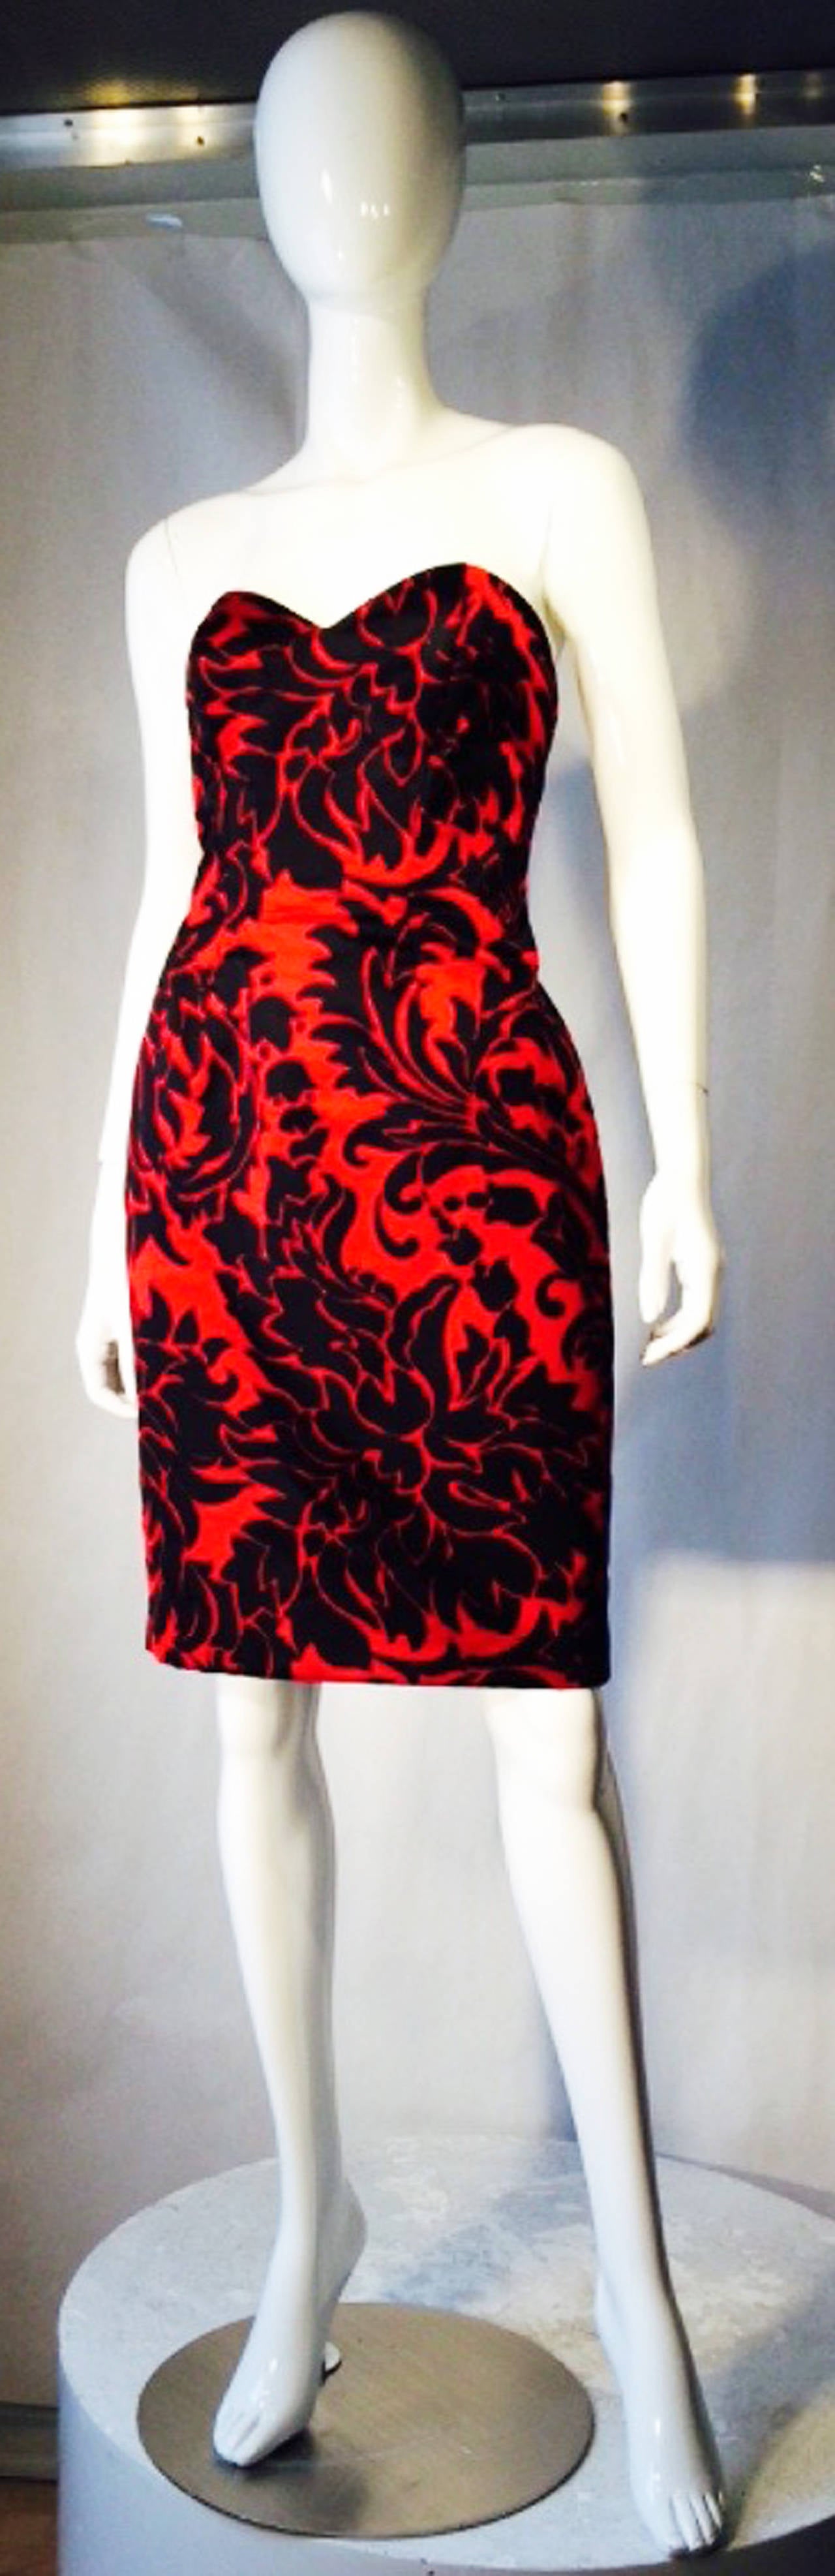 A fine vintage Vicky Tiel Couture cocktail dress. Exquisite red black printed heavy silk twill fabric item fully lined with a boned bodice and zips up back. Pristine appears unworn.